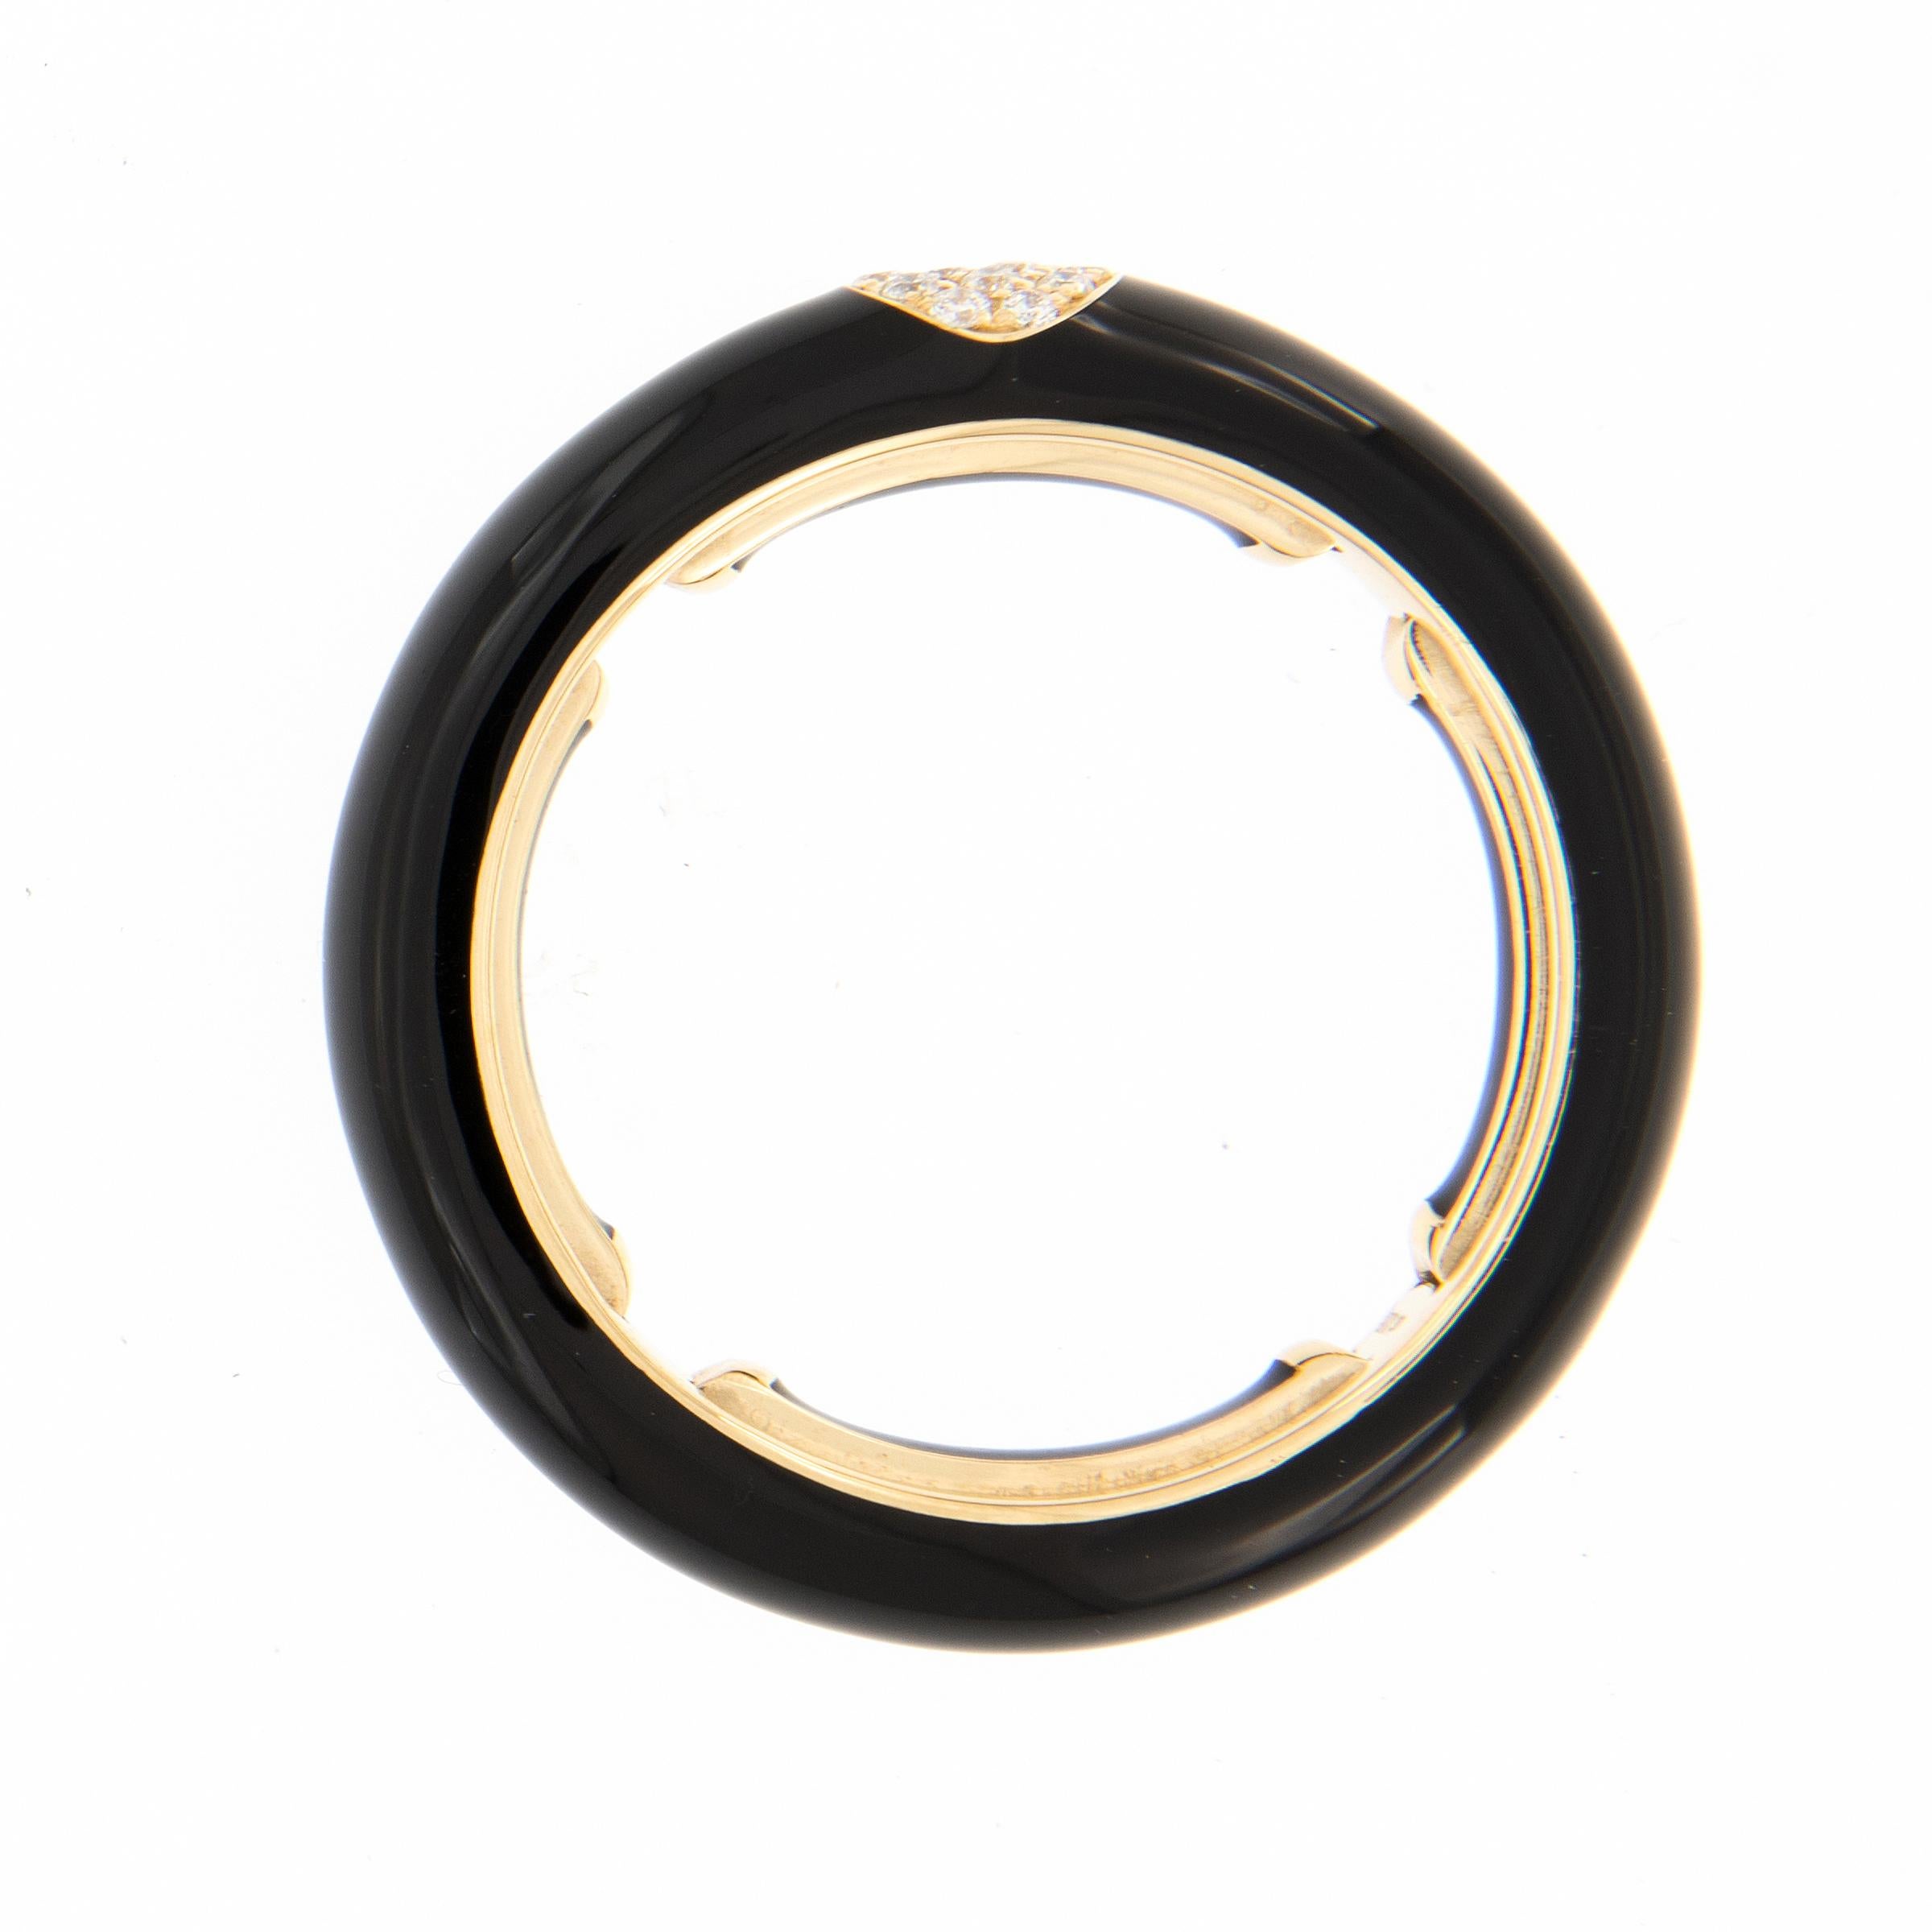 Bold, bright and beautiful! This contemporary enamel ring is hand-crafted in Italy for Campanelli & Pear. Ring is 18k yellow gold featuring a smooth enamel finish in rich black and accented with 14 pave set diamonds. The ring features a unique